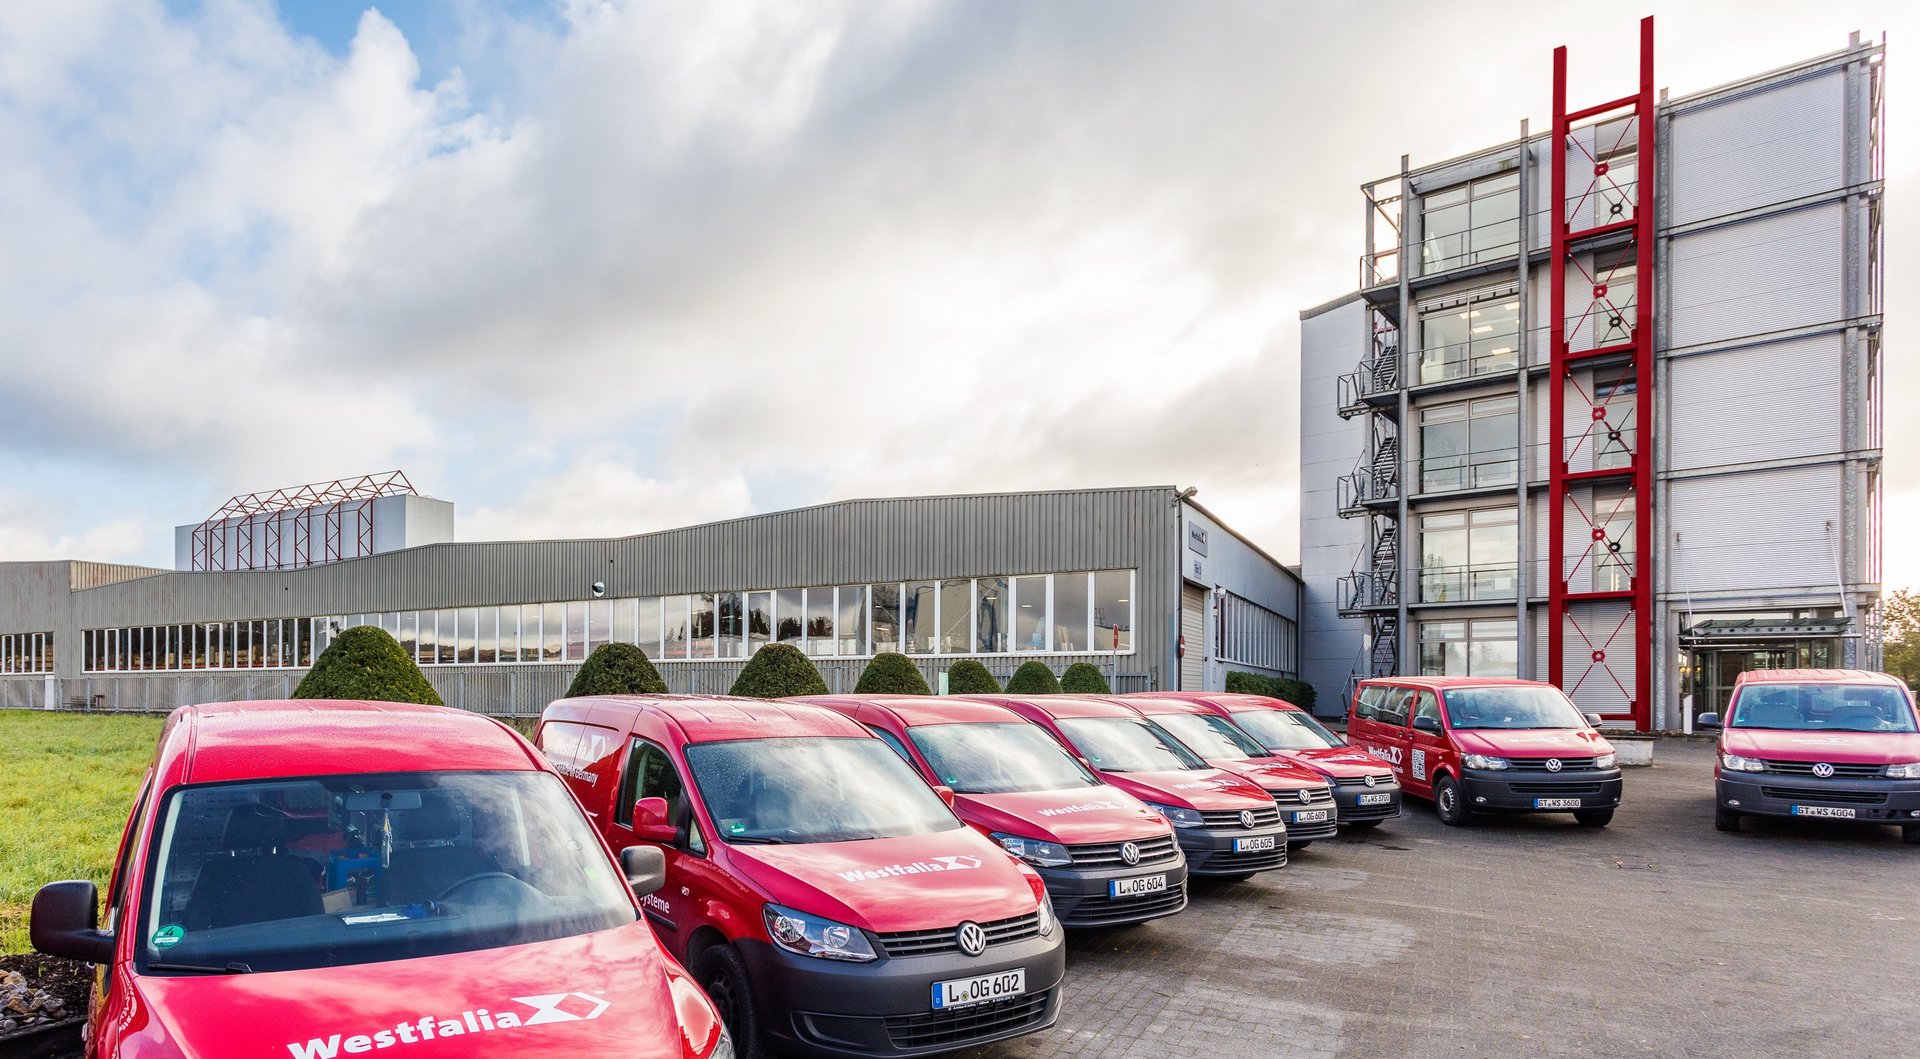 Service fleet in front of the former headquarters of Westfalia Technologies Gmbh & Co. KG